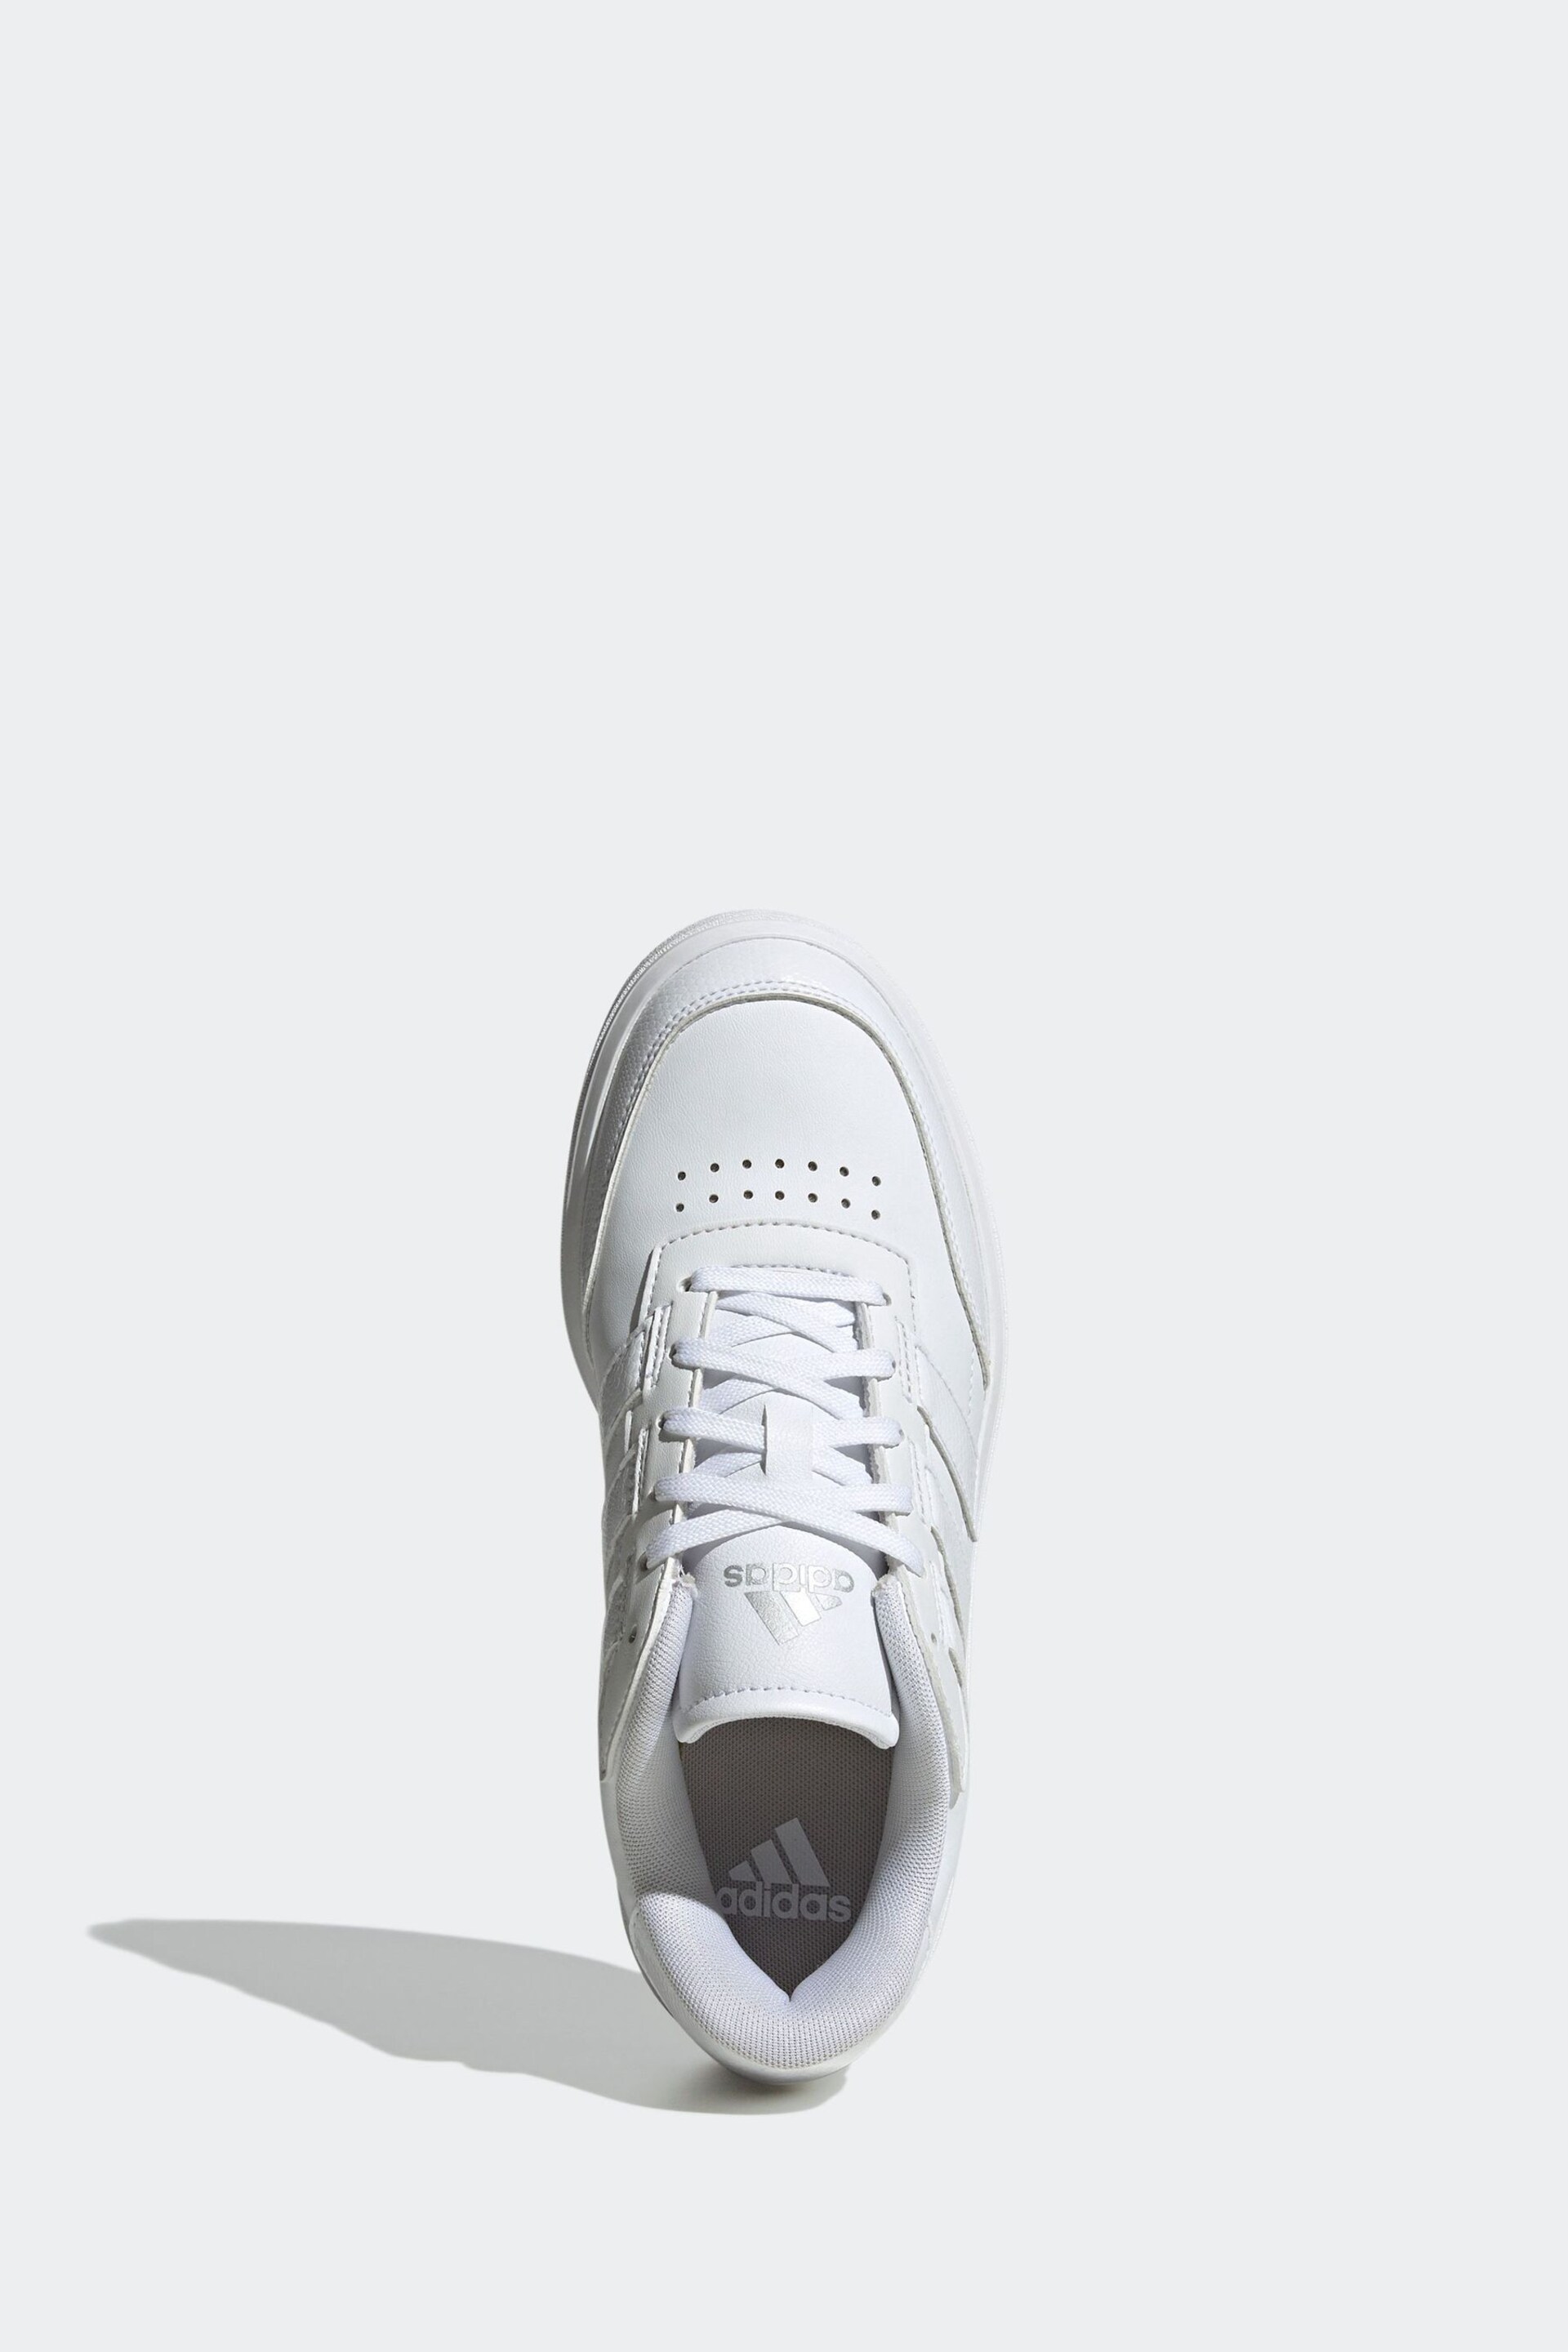 adidas White/Silver Sportswear Courtblock Trainers - Image 5 of 6